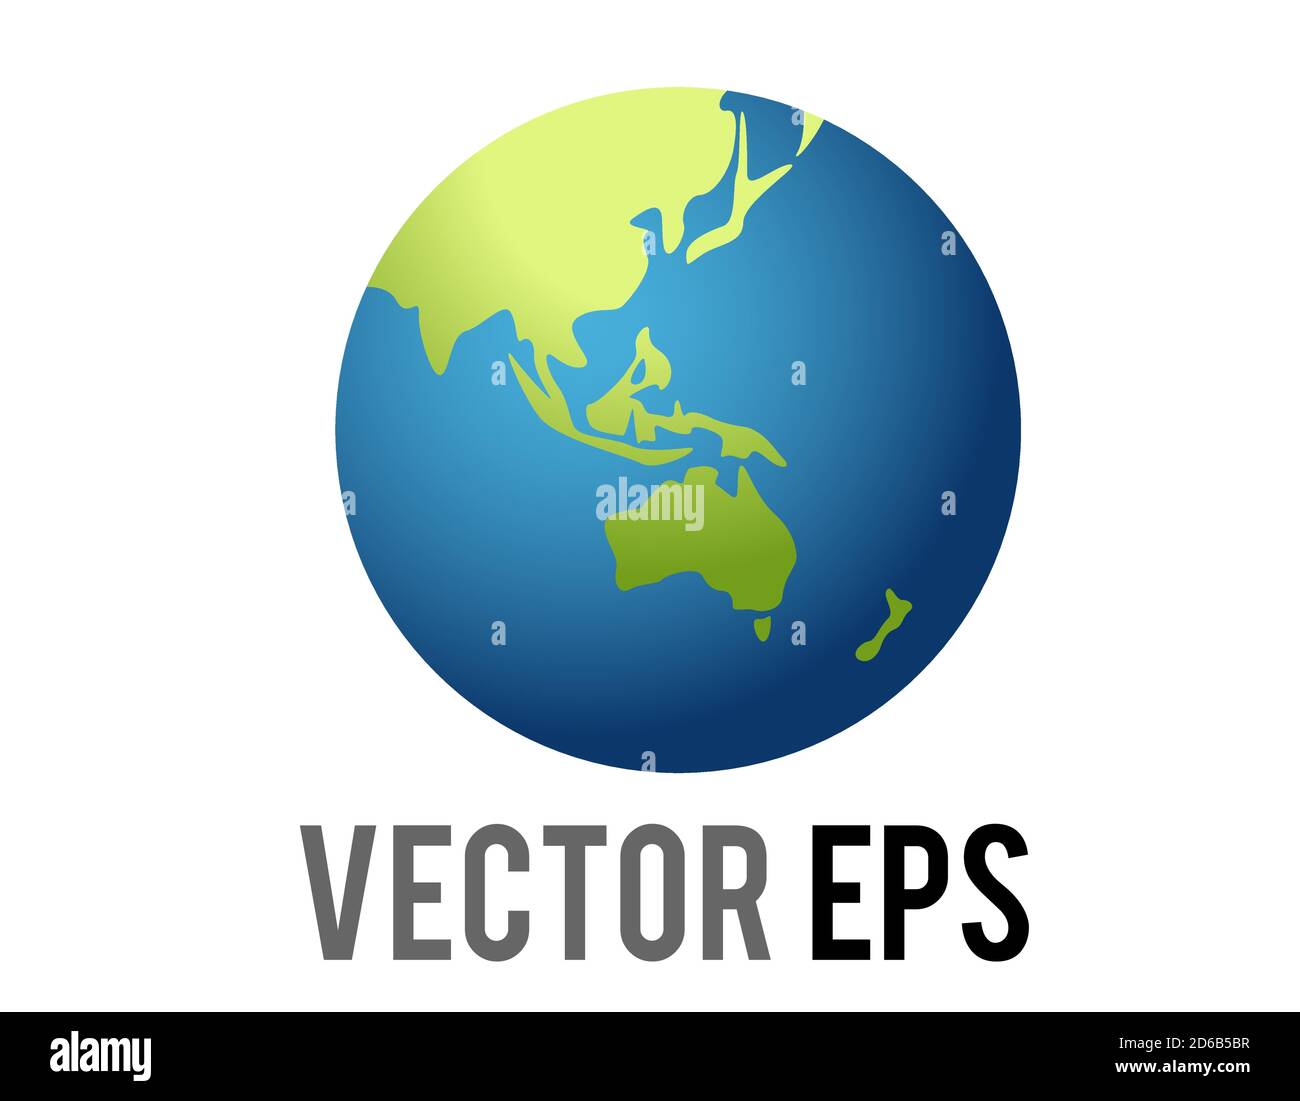 The isolated vector globe icon, showing showing Asia and Australia in green against blue ocean, represent various content concerning Asian, Australian Stock Vector